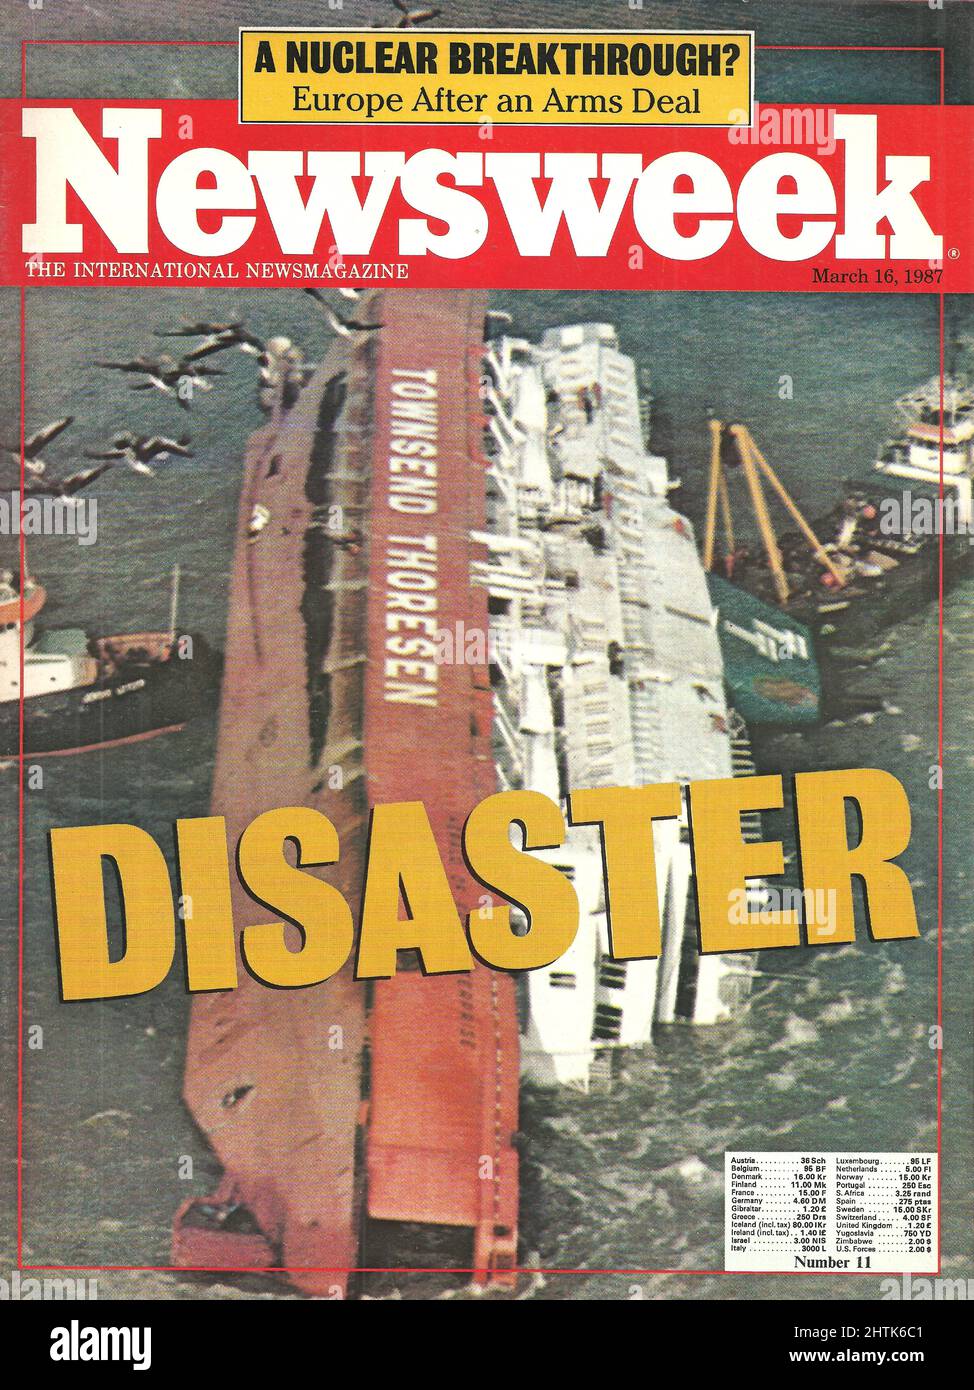 Newsweek cover March 16 1987 Disaster A nuclear Breakthroug Europe after an arms deal Stock Photo